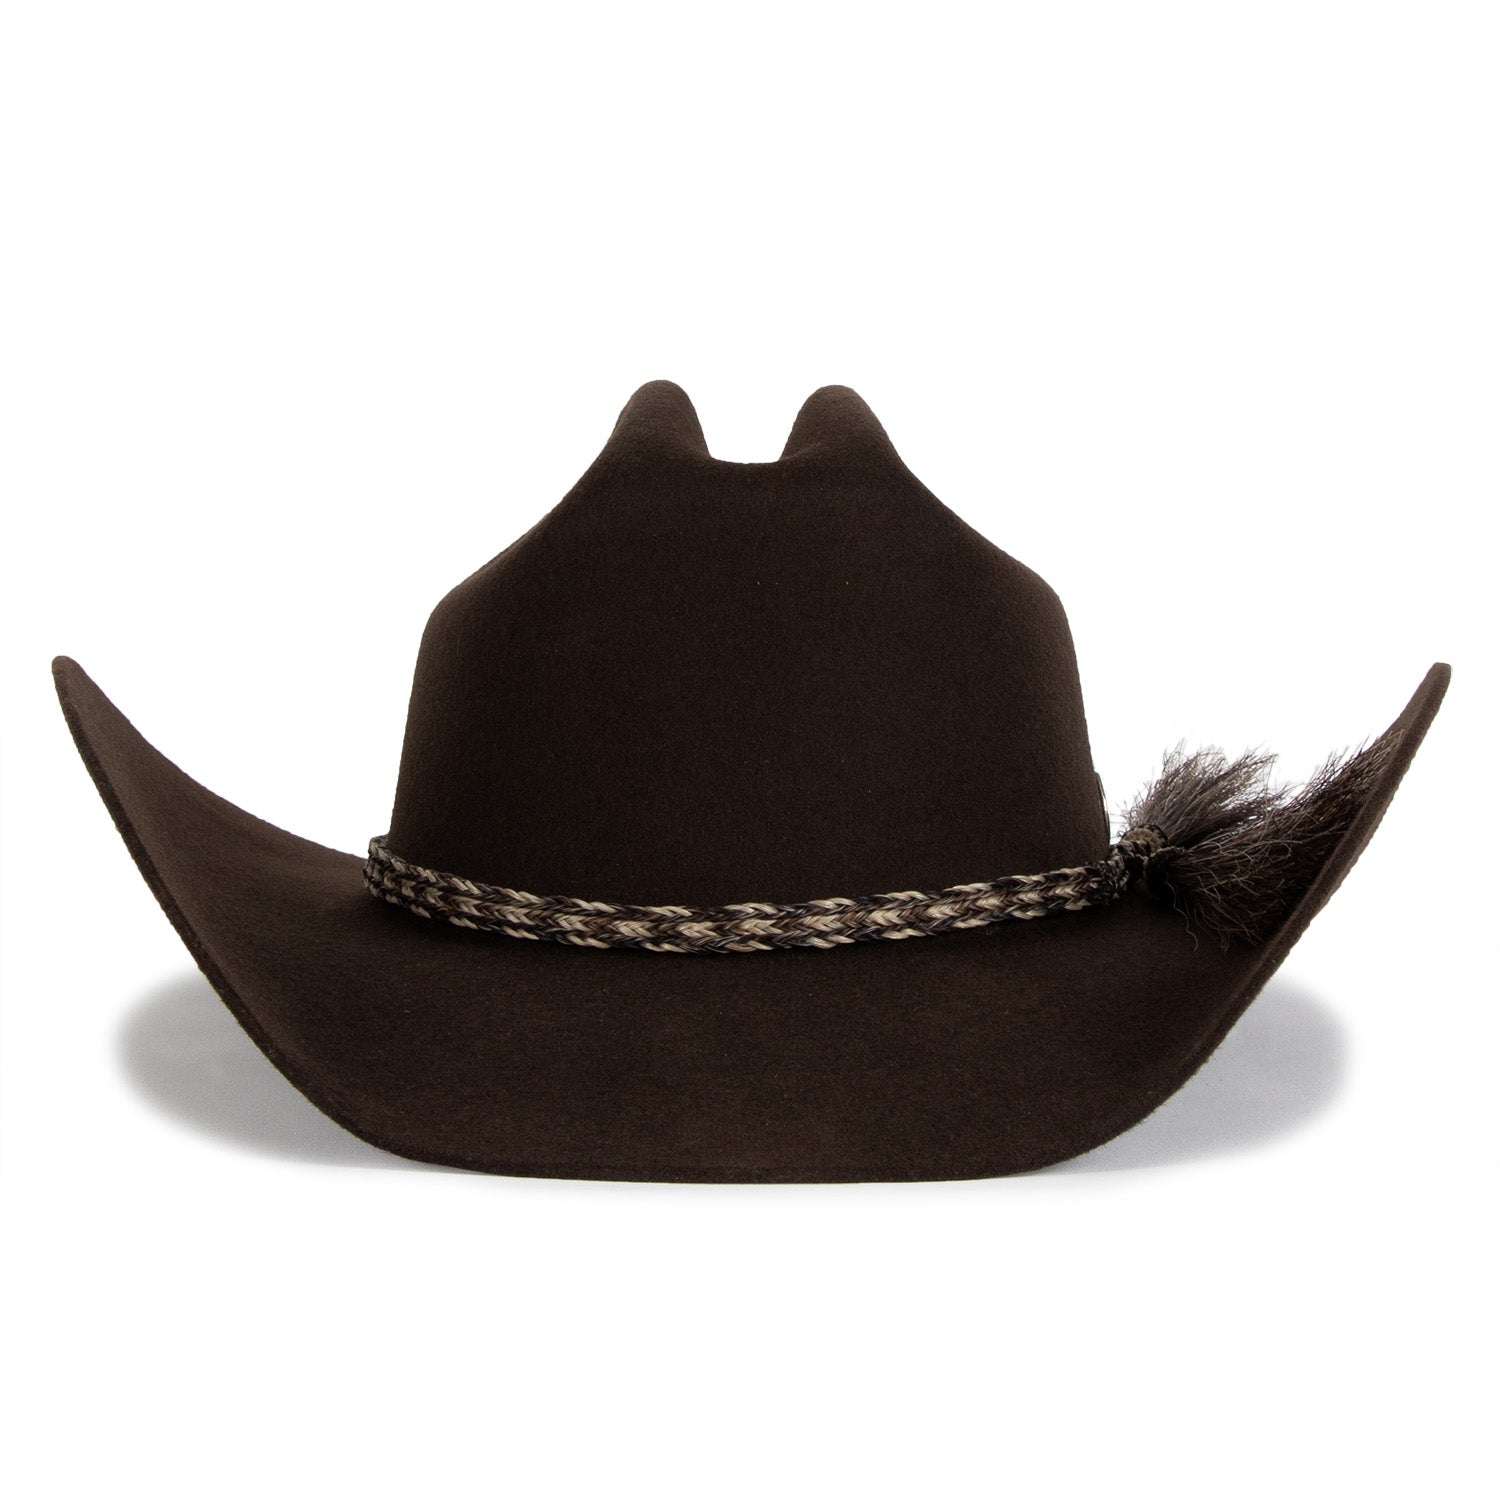 Seager x Coors Banquet Longhorn 4X Hat Black